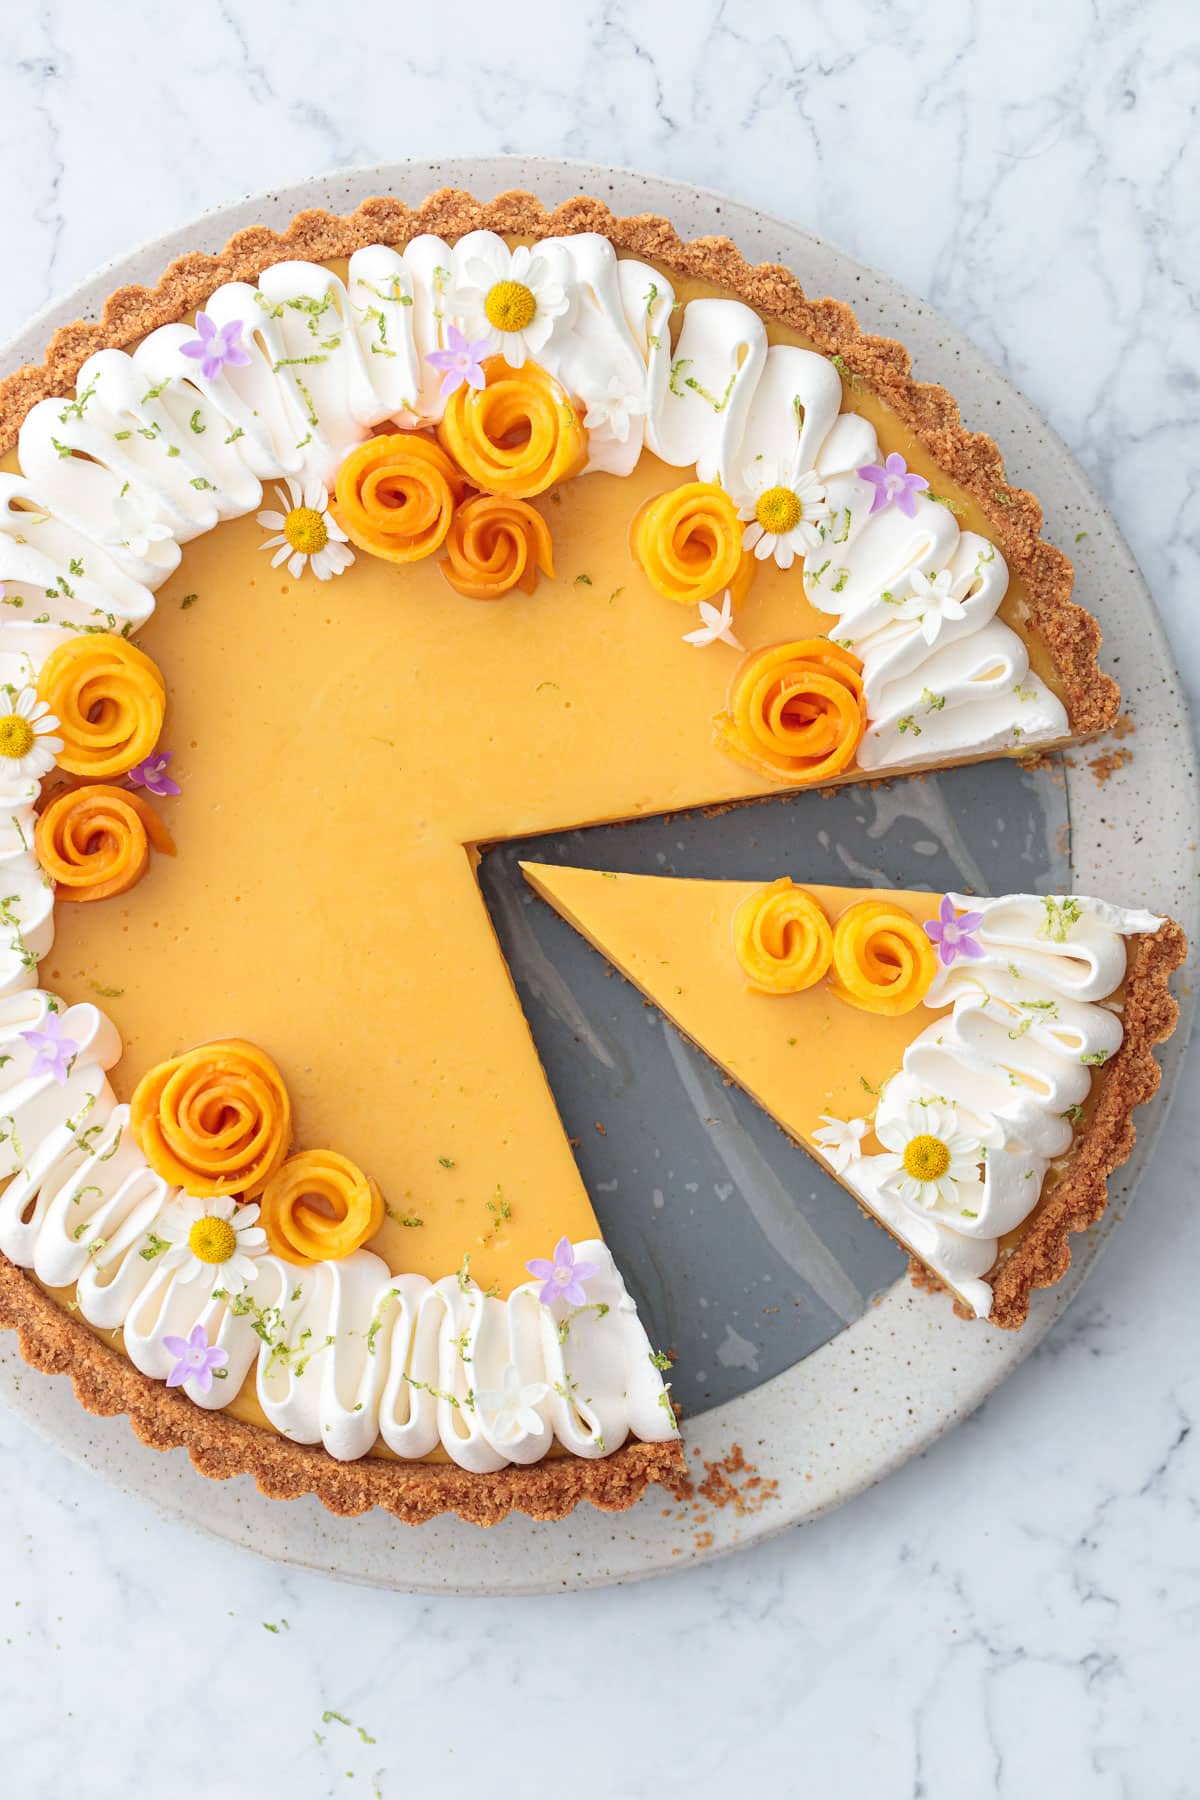 Overhead, Mango Lime Tart with a slice taken out of it, topped with whipped cream, lime zest, and edible flowers.